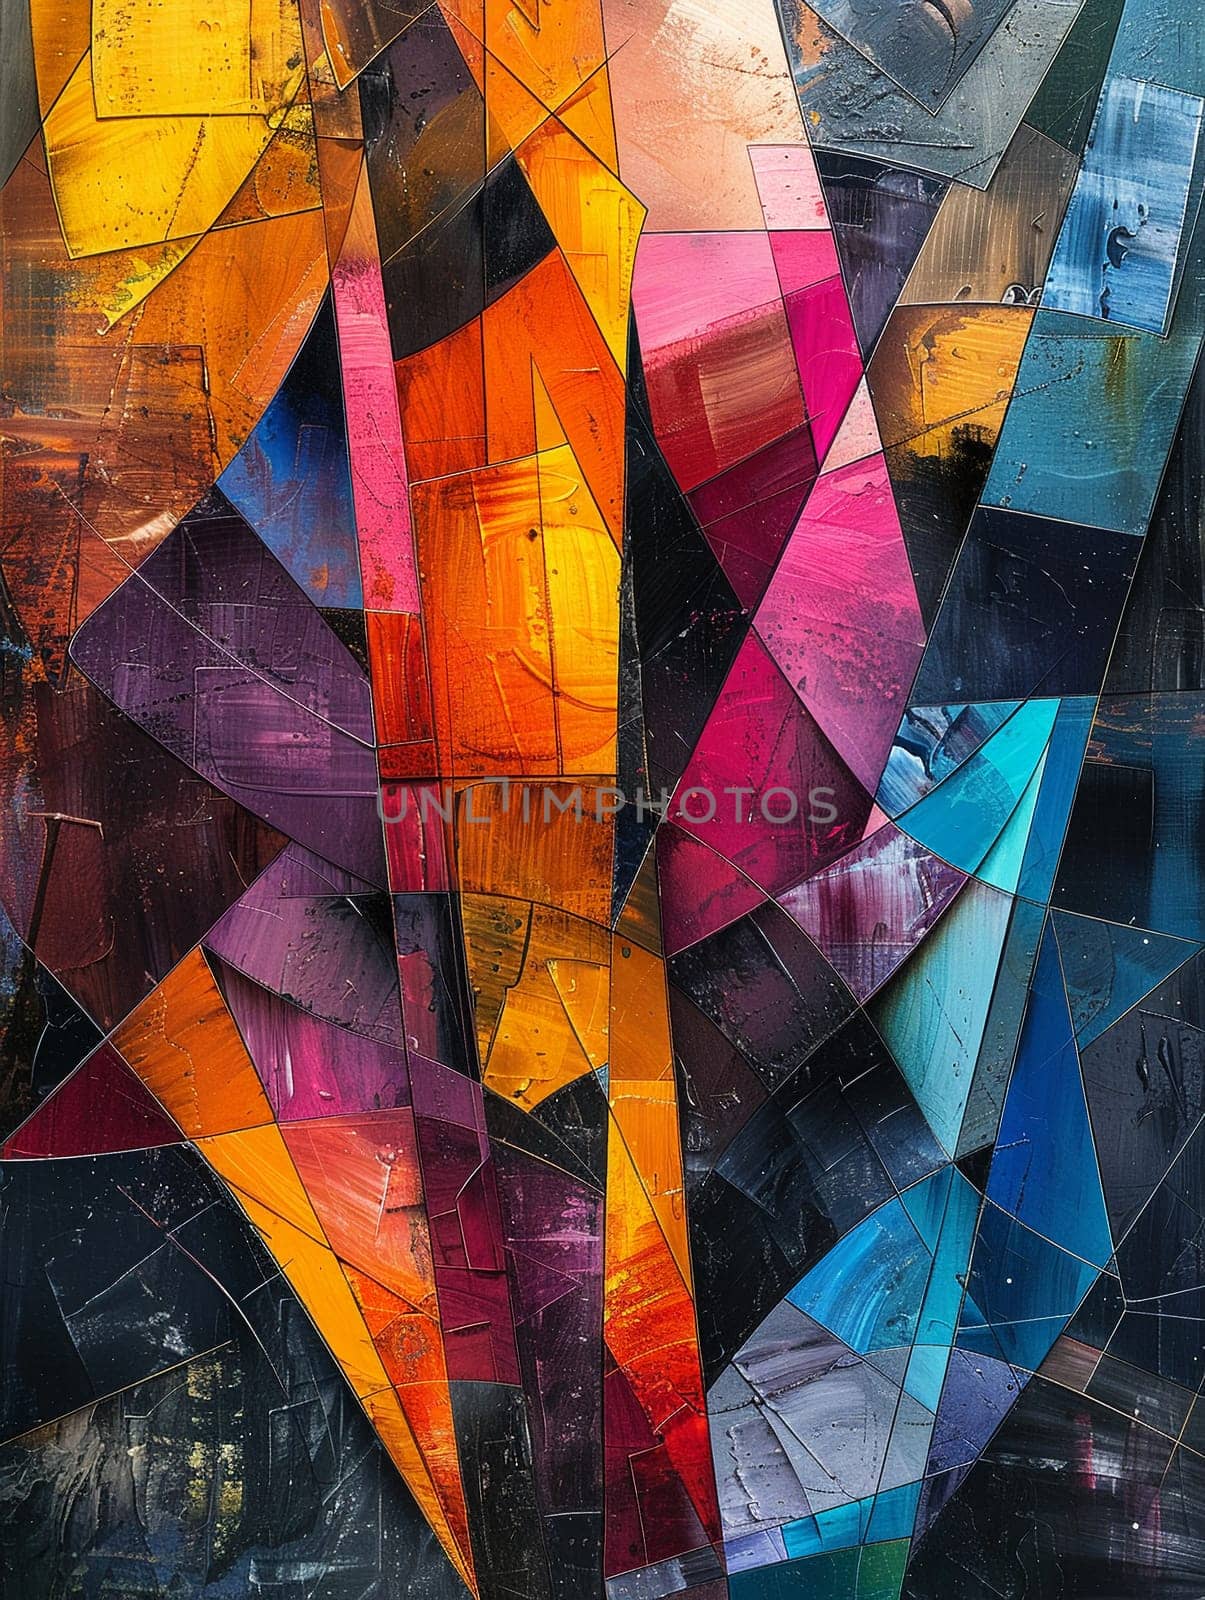 Artist's studio chaos painted in a dynamic, cubist style, with bold colors and abstract shapes.